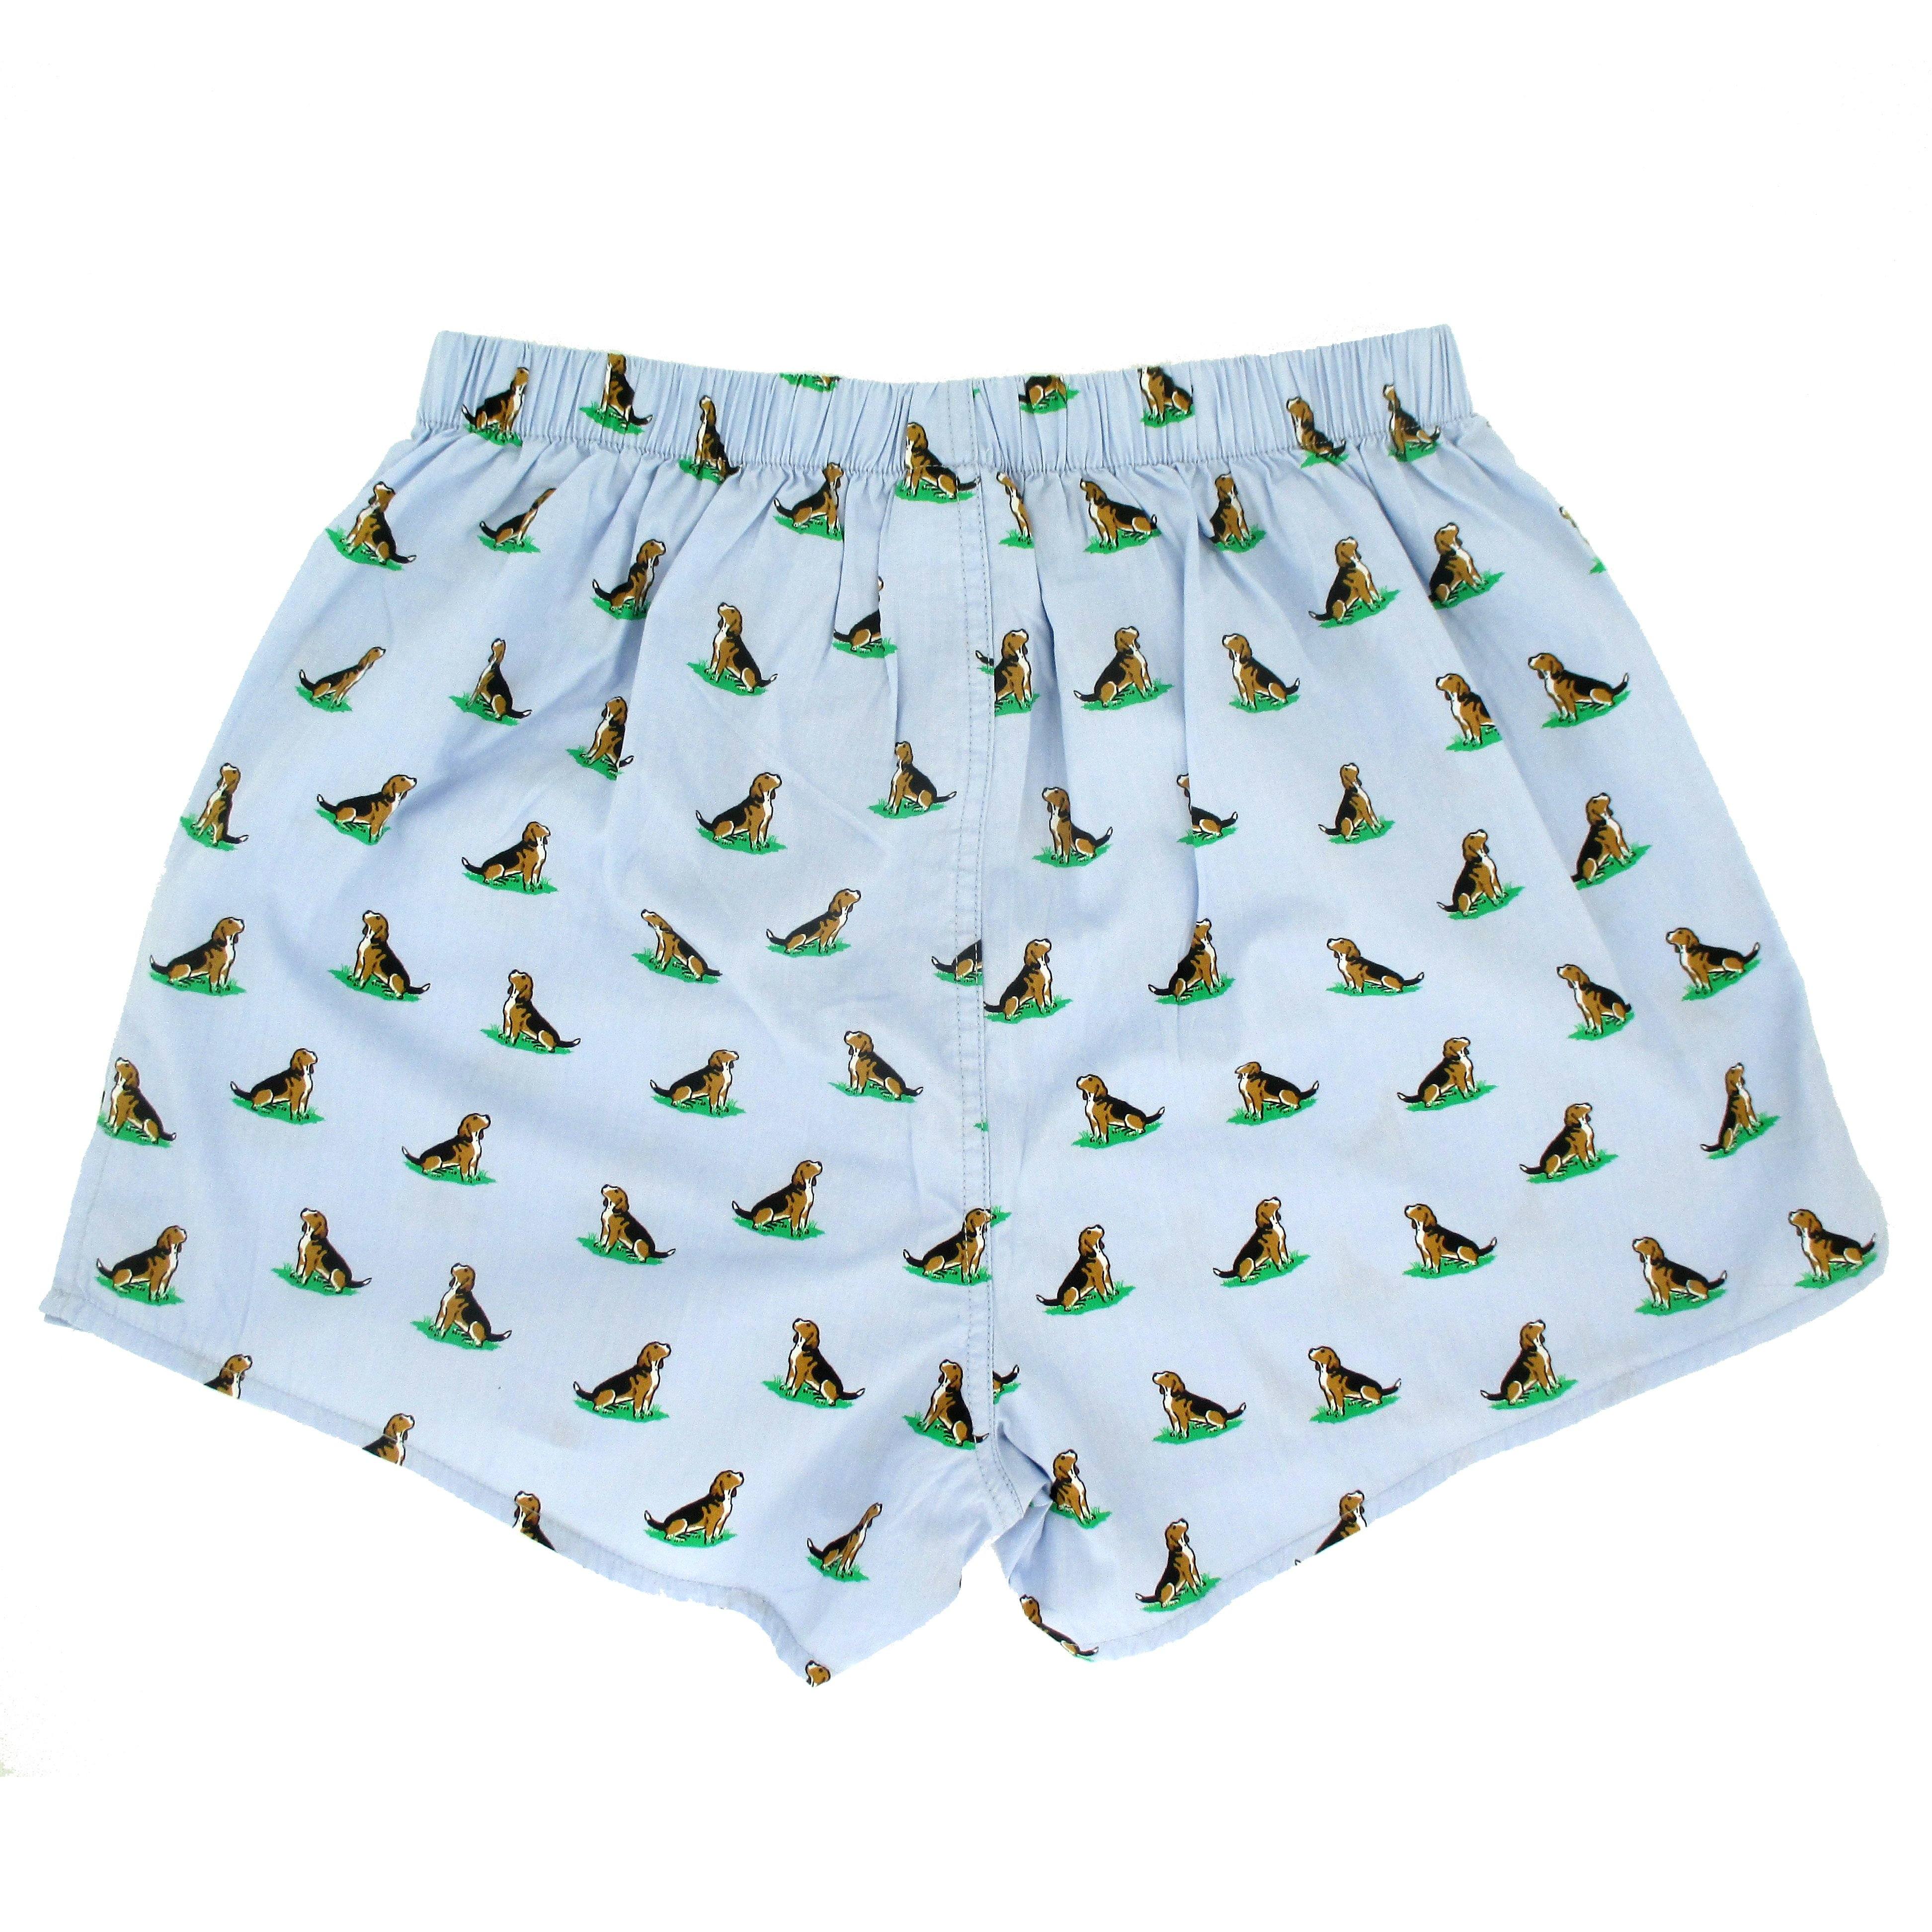 Rock Atoll Men's Boxer Shorts with Sitting Beagle Pattern in Light Blue Soft Comfy Undies